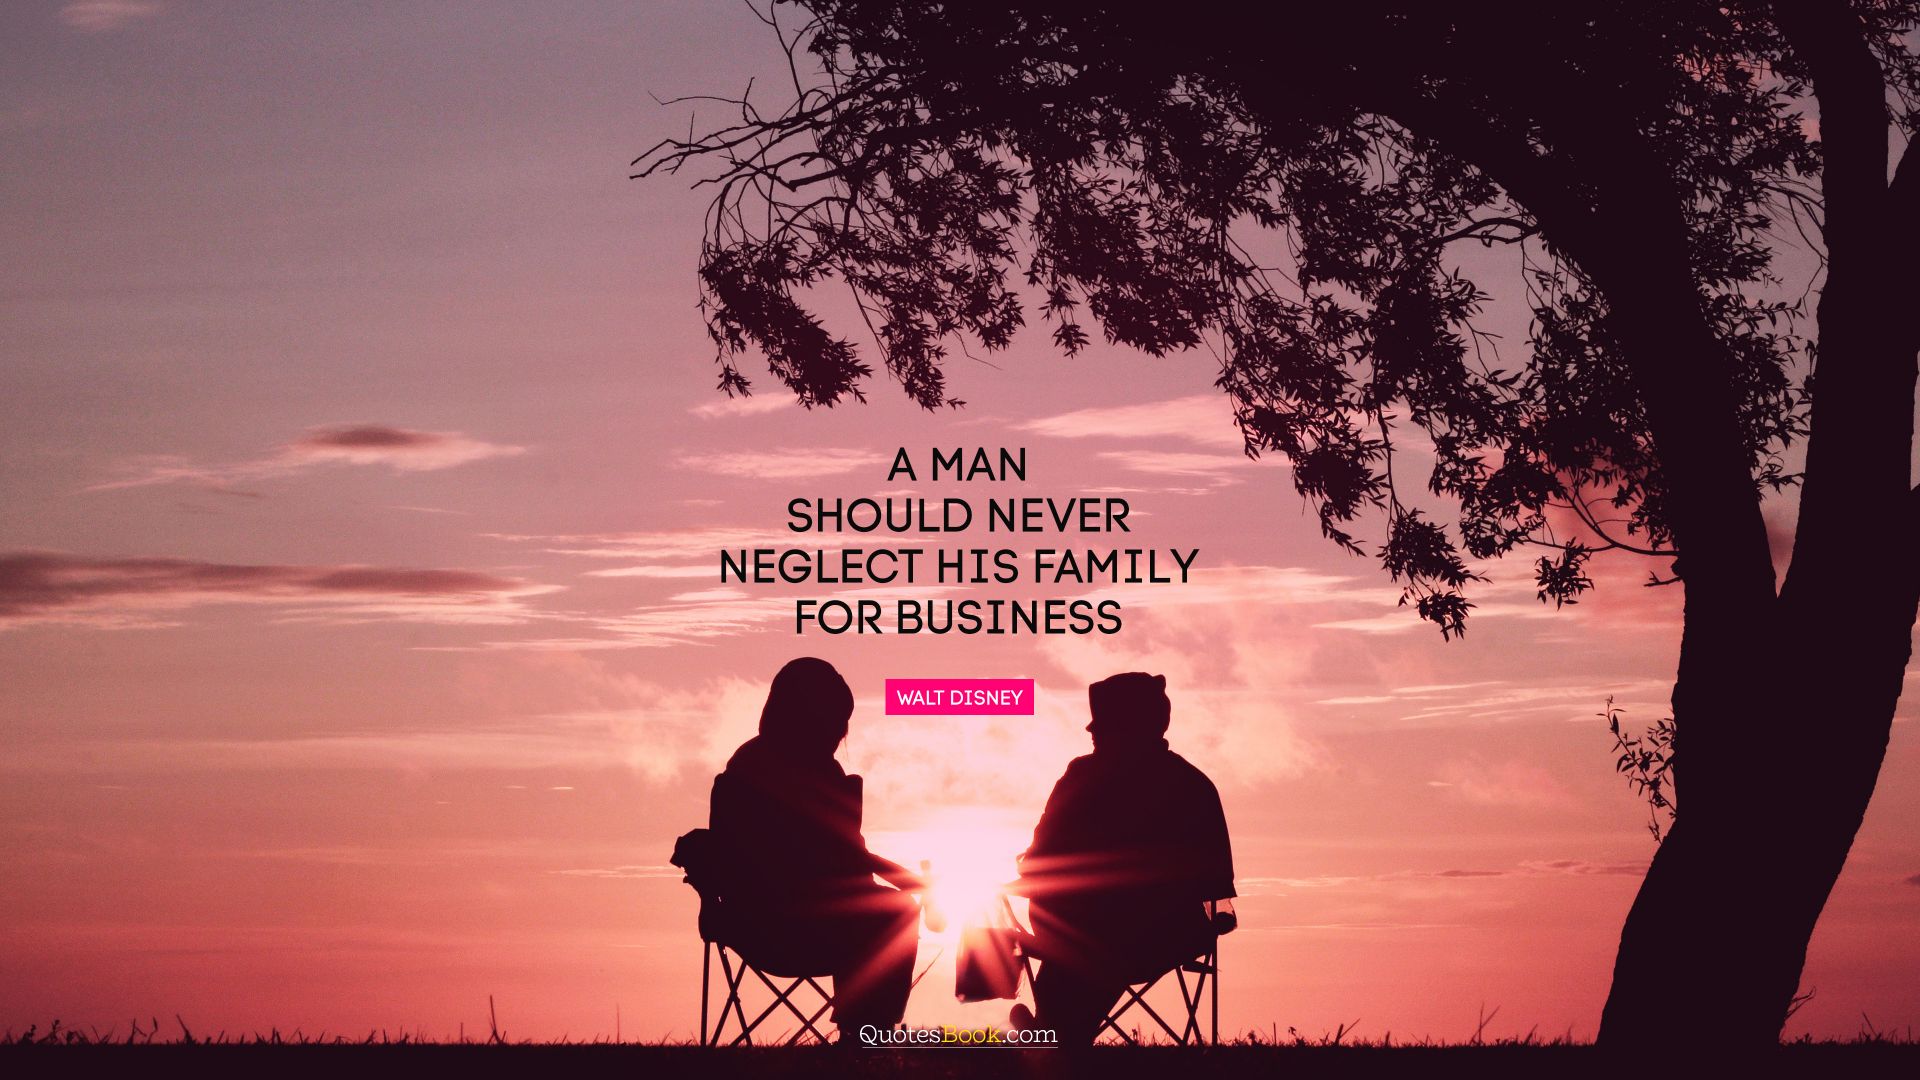 A man should never neglect his family for business. - Quote by Walt Disney